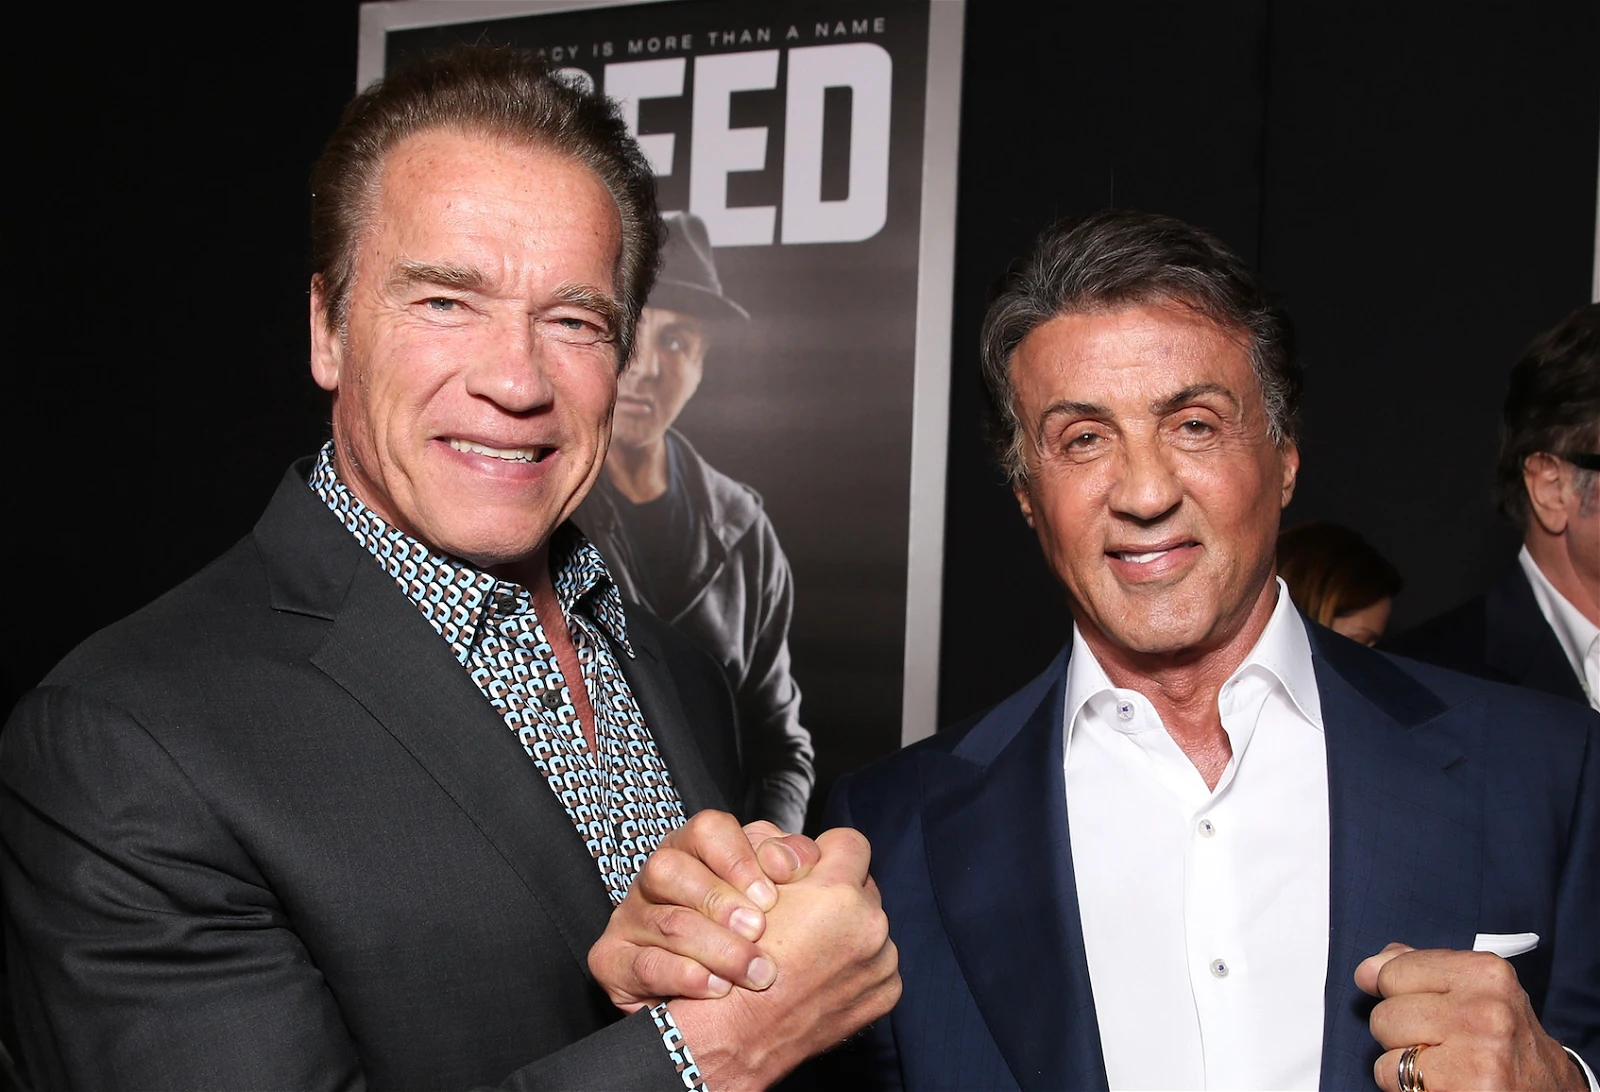 Sylvester Stallone and Arnold Schwarzenegger became rivals after the 1977 Golden Globes